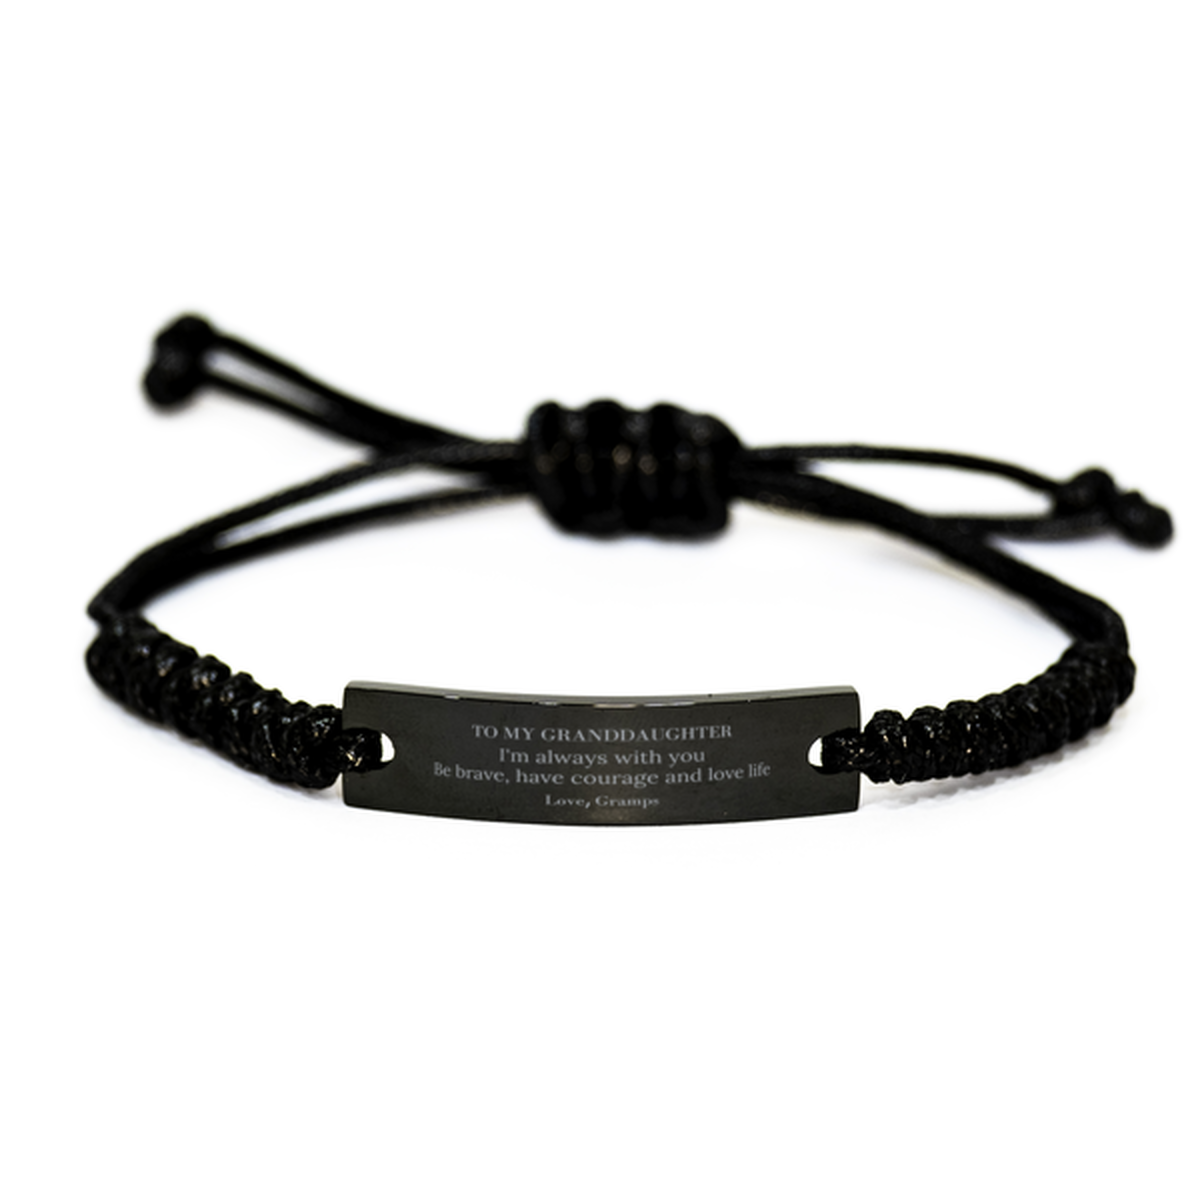 To My Granddaughter Gifts from Gramps, Unique Black Rope Bracelet Inspirational Christmas Birthday Graduation Gifts for Granddaughter I'm always with you. Be brave, have courage and love life. Love, Gramps